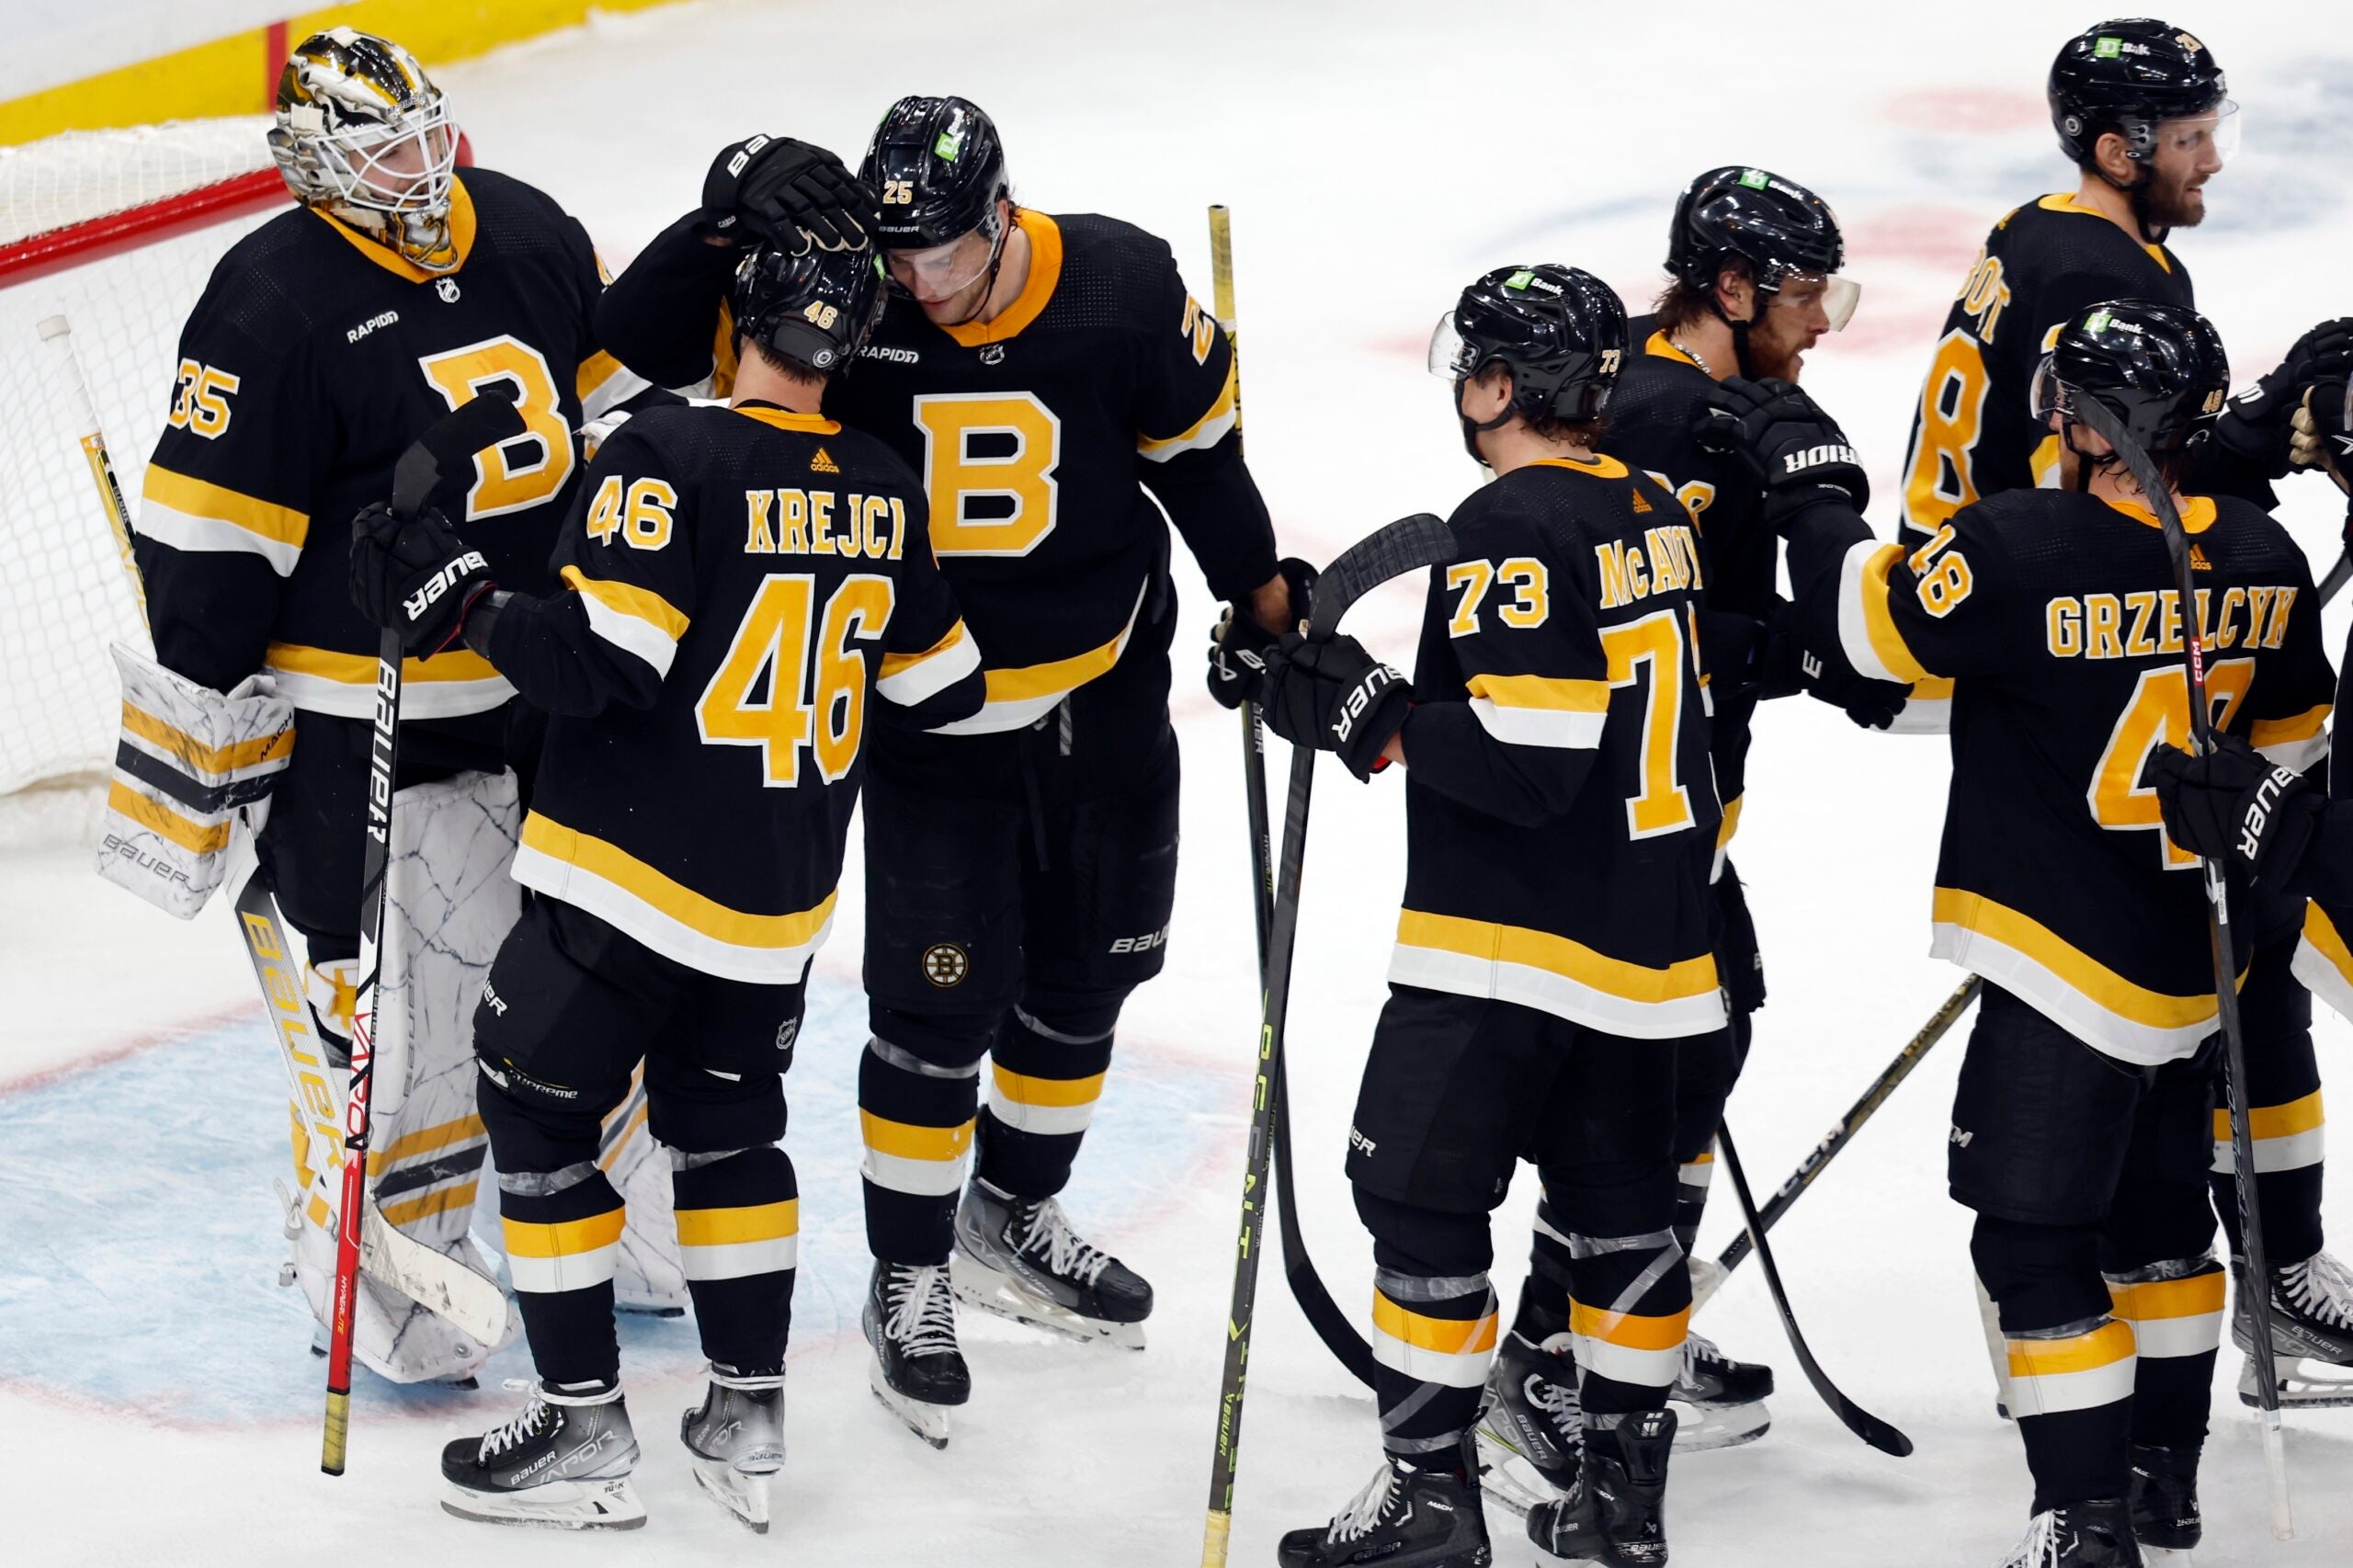 The Boston Bruins set the record for most wins in an NHL regular season this year.